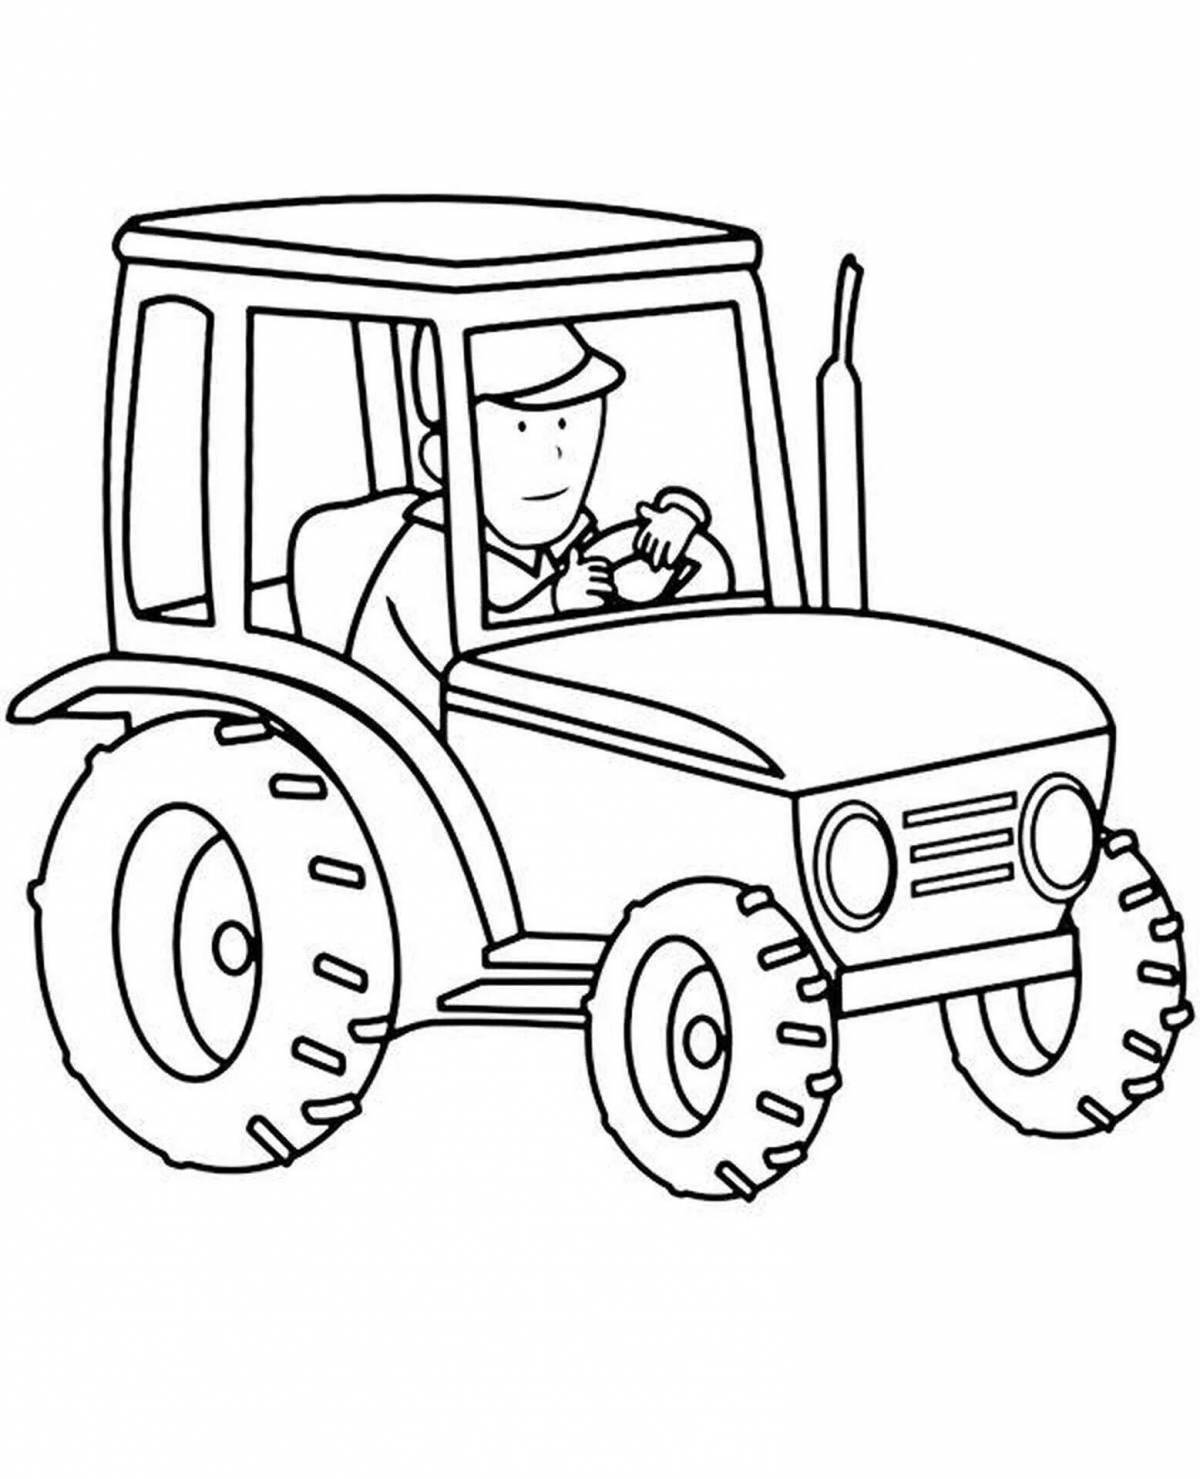 Great blue tractor coloring page for little ones